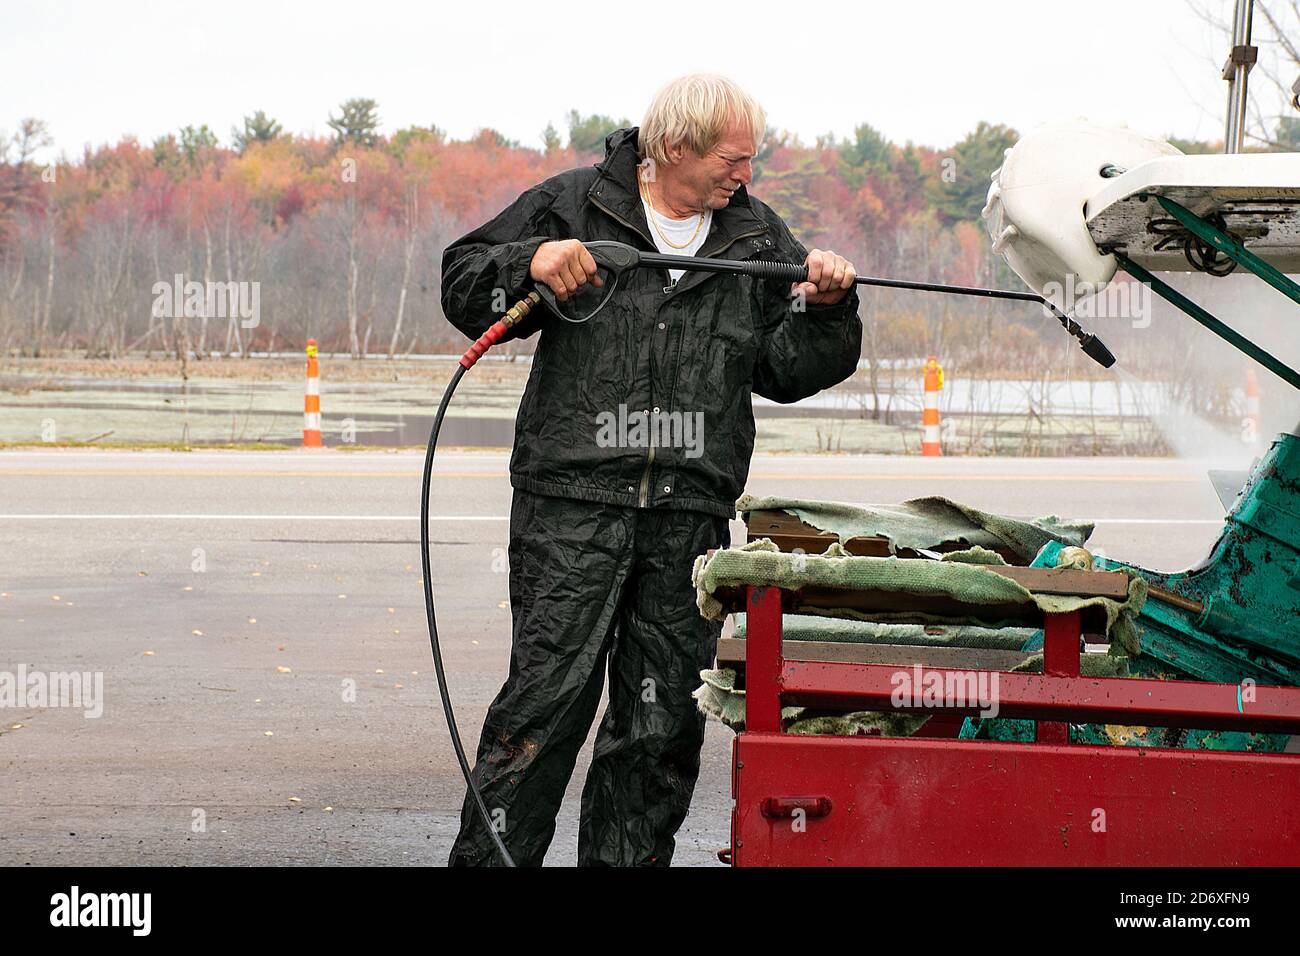 Caucasian man using pressure washer on dirty boat stern Stock Photo